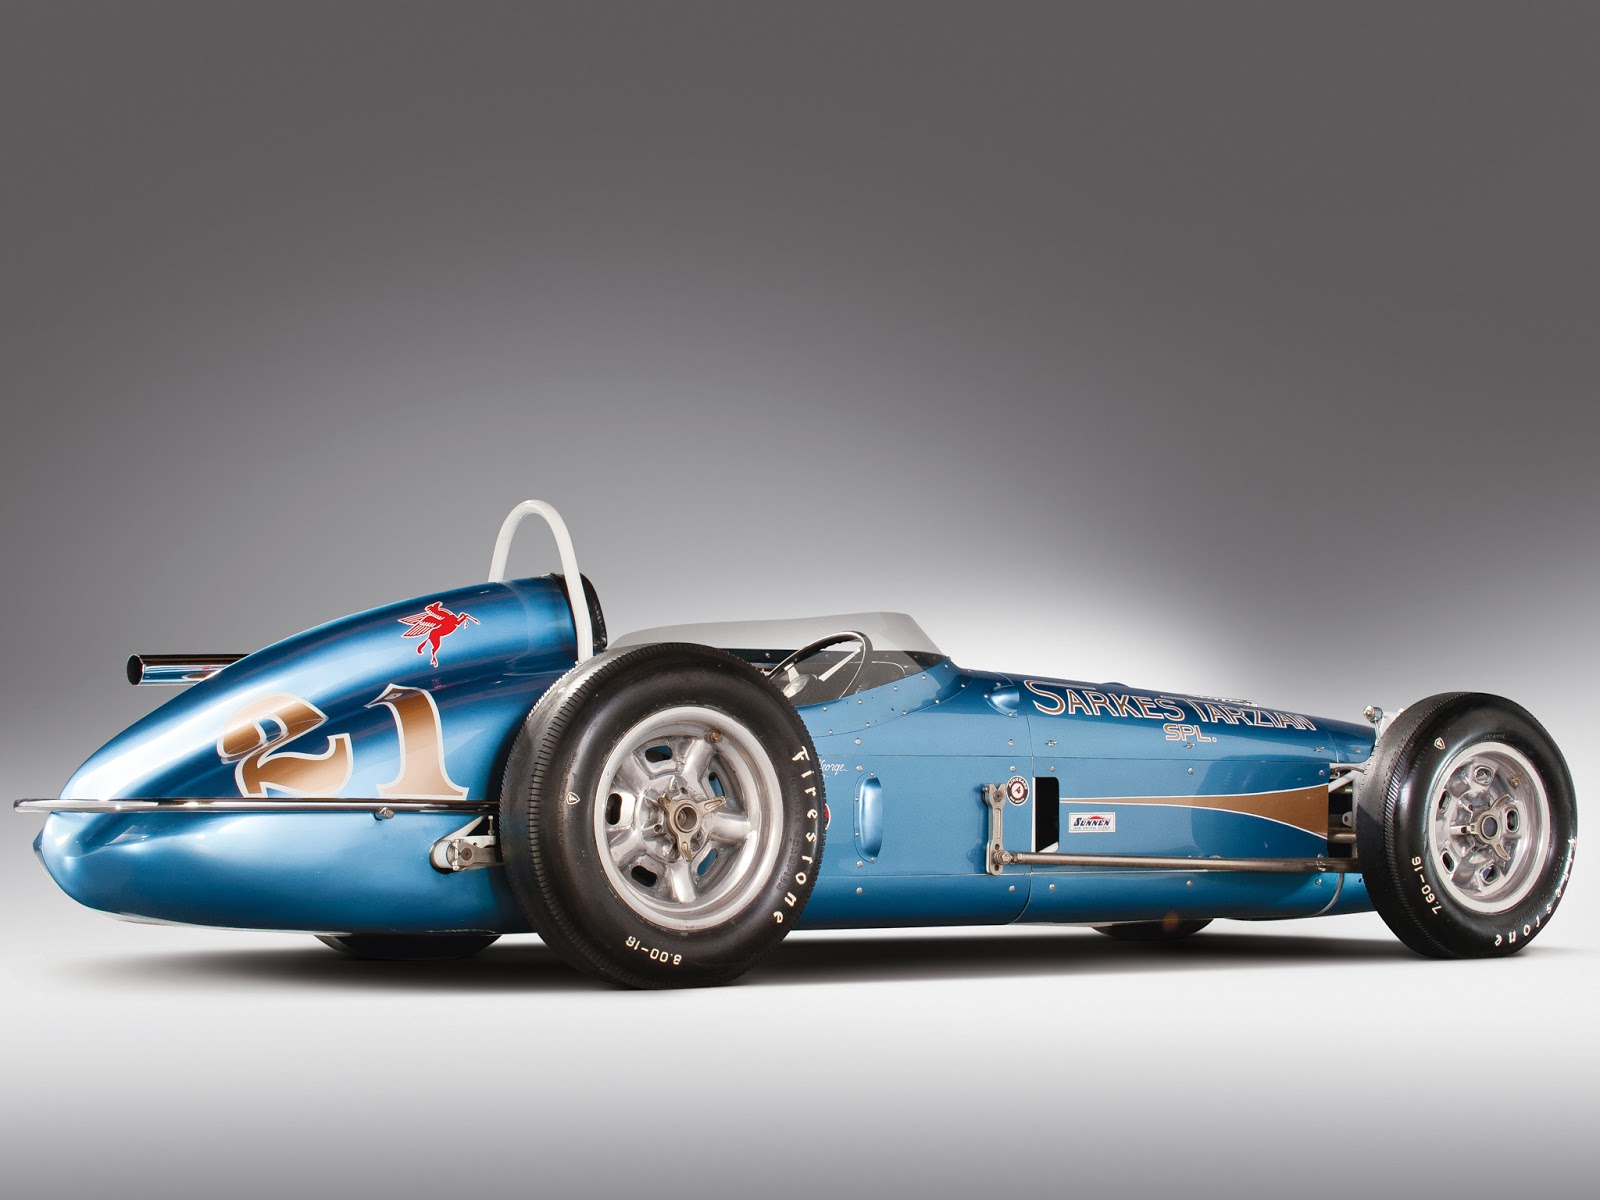 Clasp Garage: 1962 Lesovsky Indianapolis Roadster